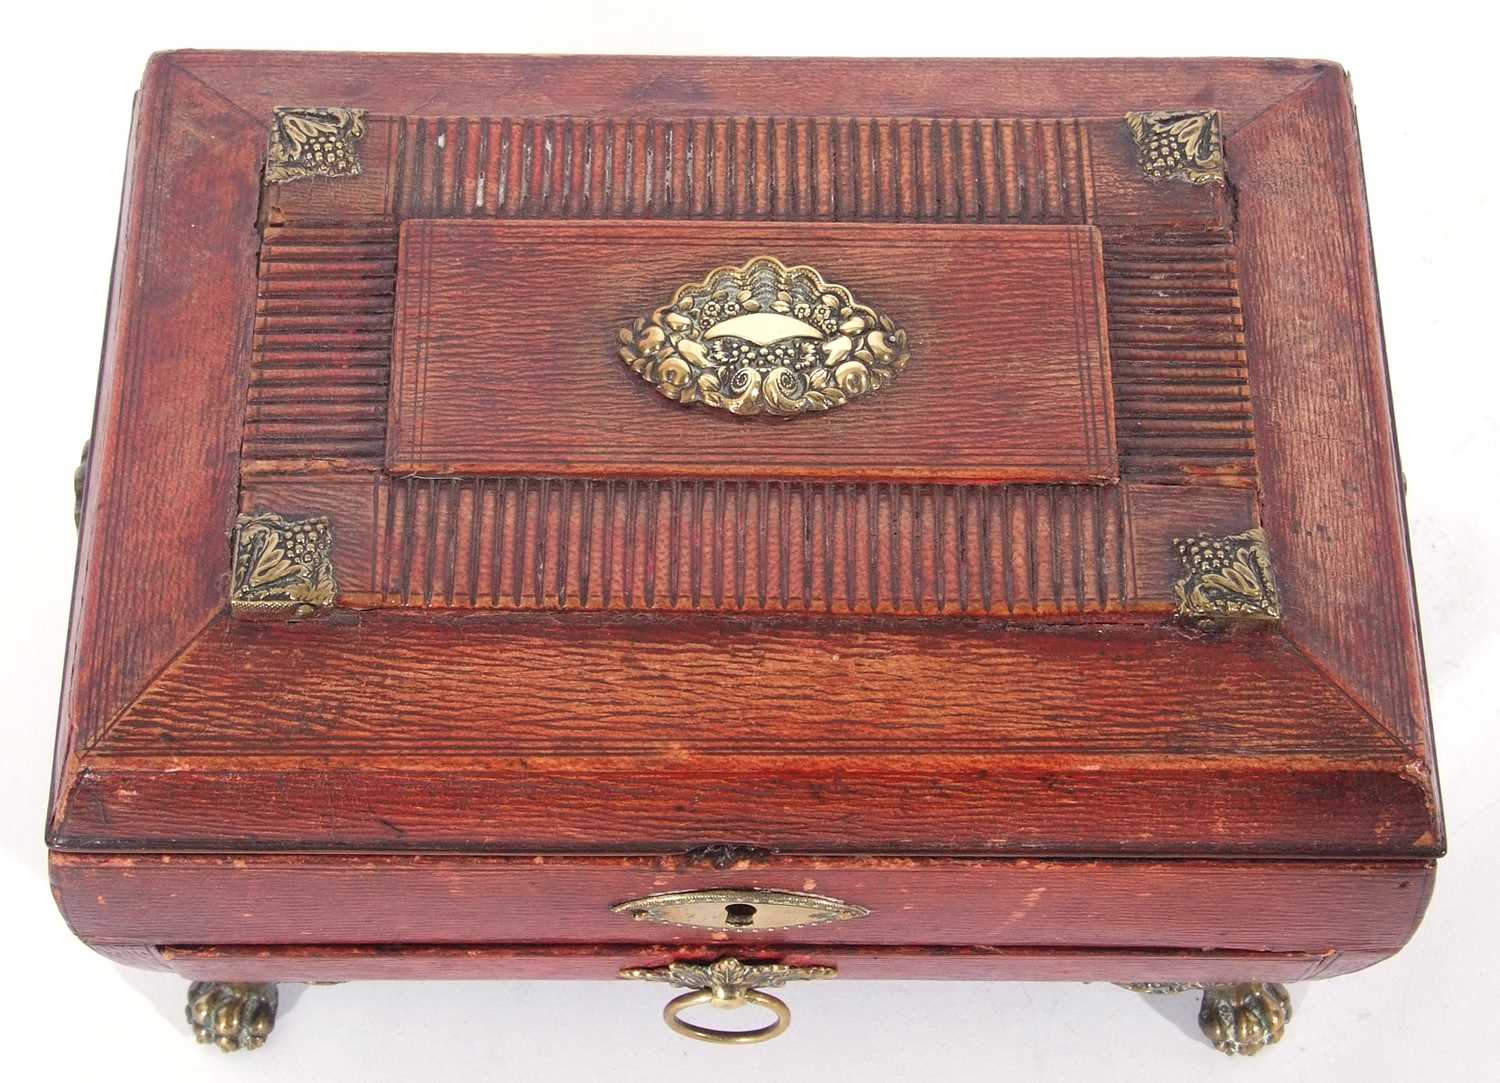 Regency red leather and brass embossed jewel box, hinged lid with silk lined interior, single drawer - Image 5 of 11